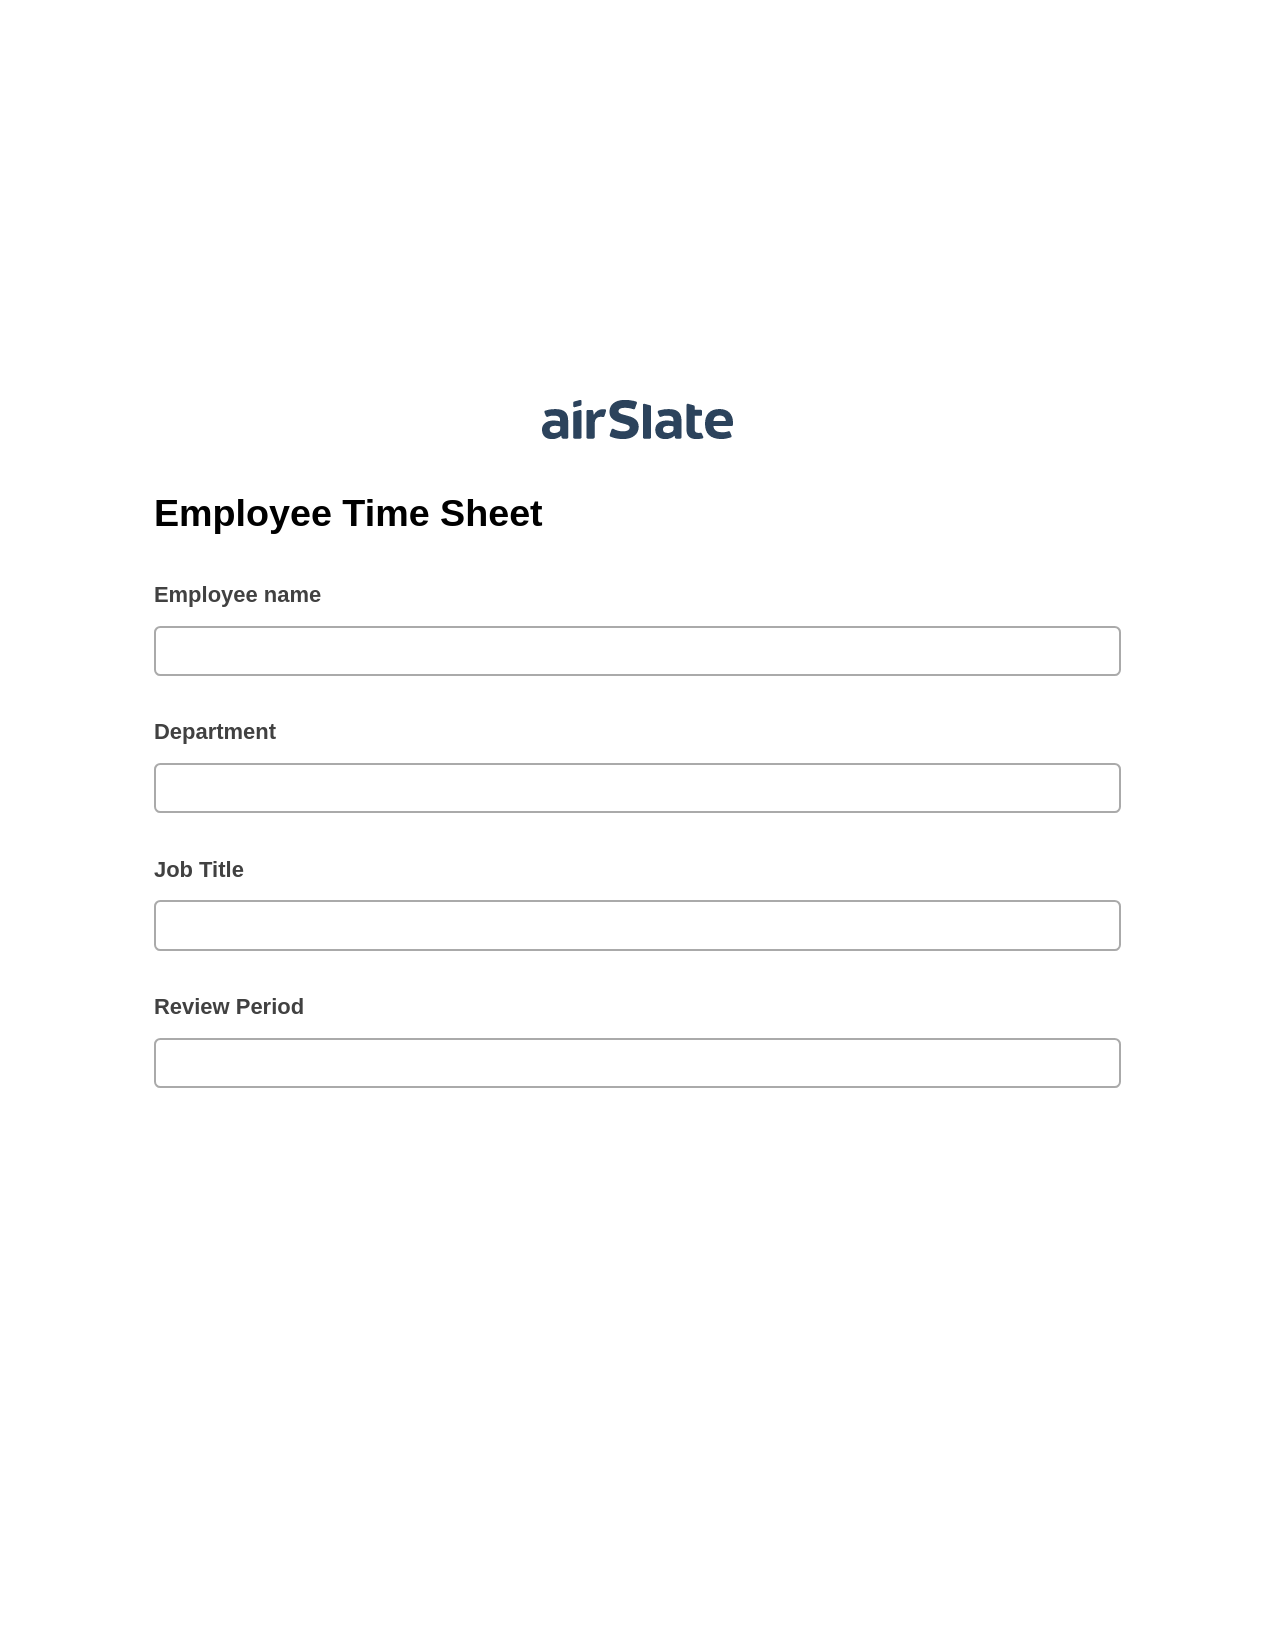 Employee Time Sheet Pre-fill Dropdowns from Office 365 Excel Bot, Send Mailchimp Campaign Bot, Export to Excel 365 Bot